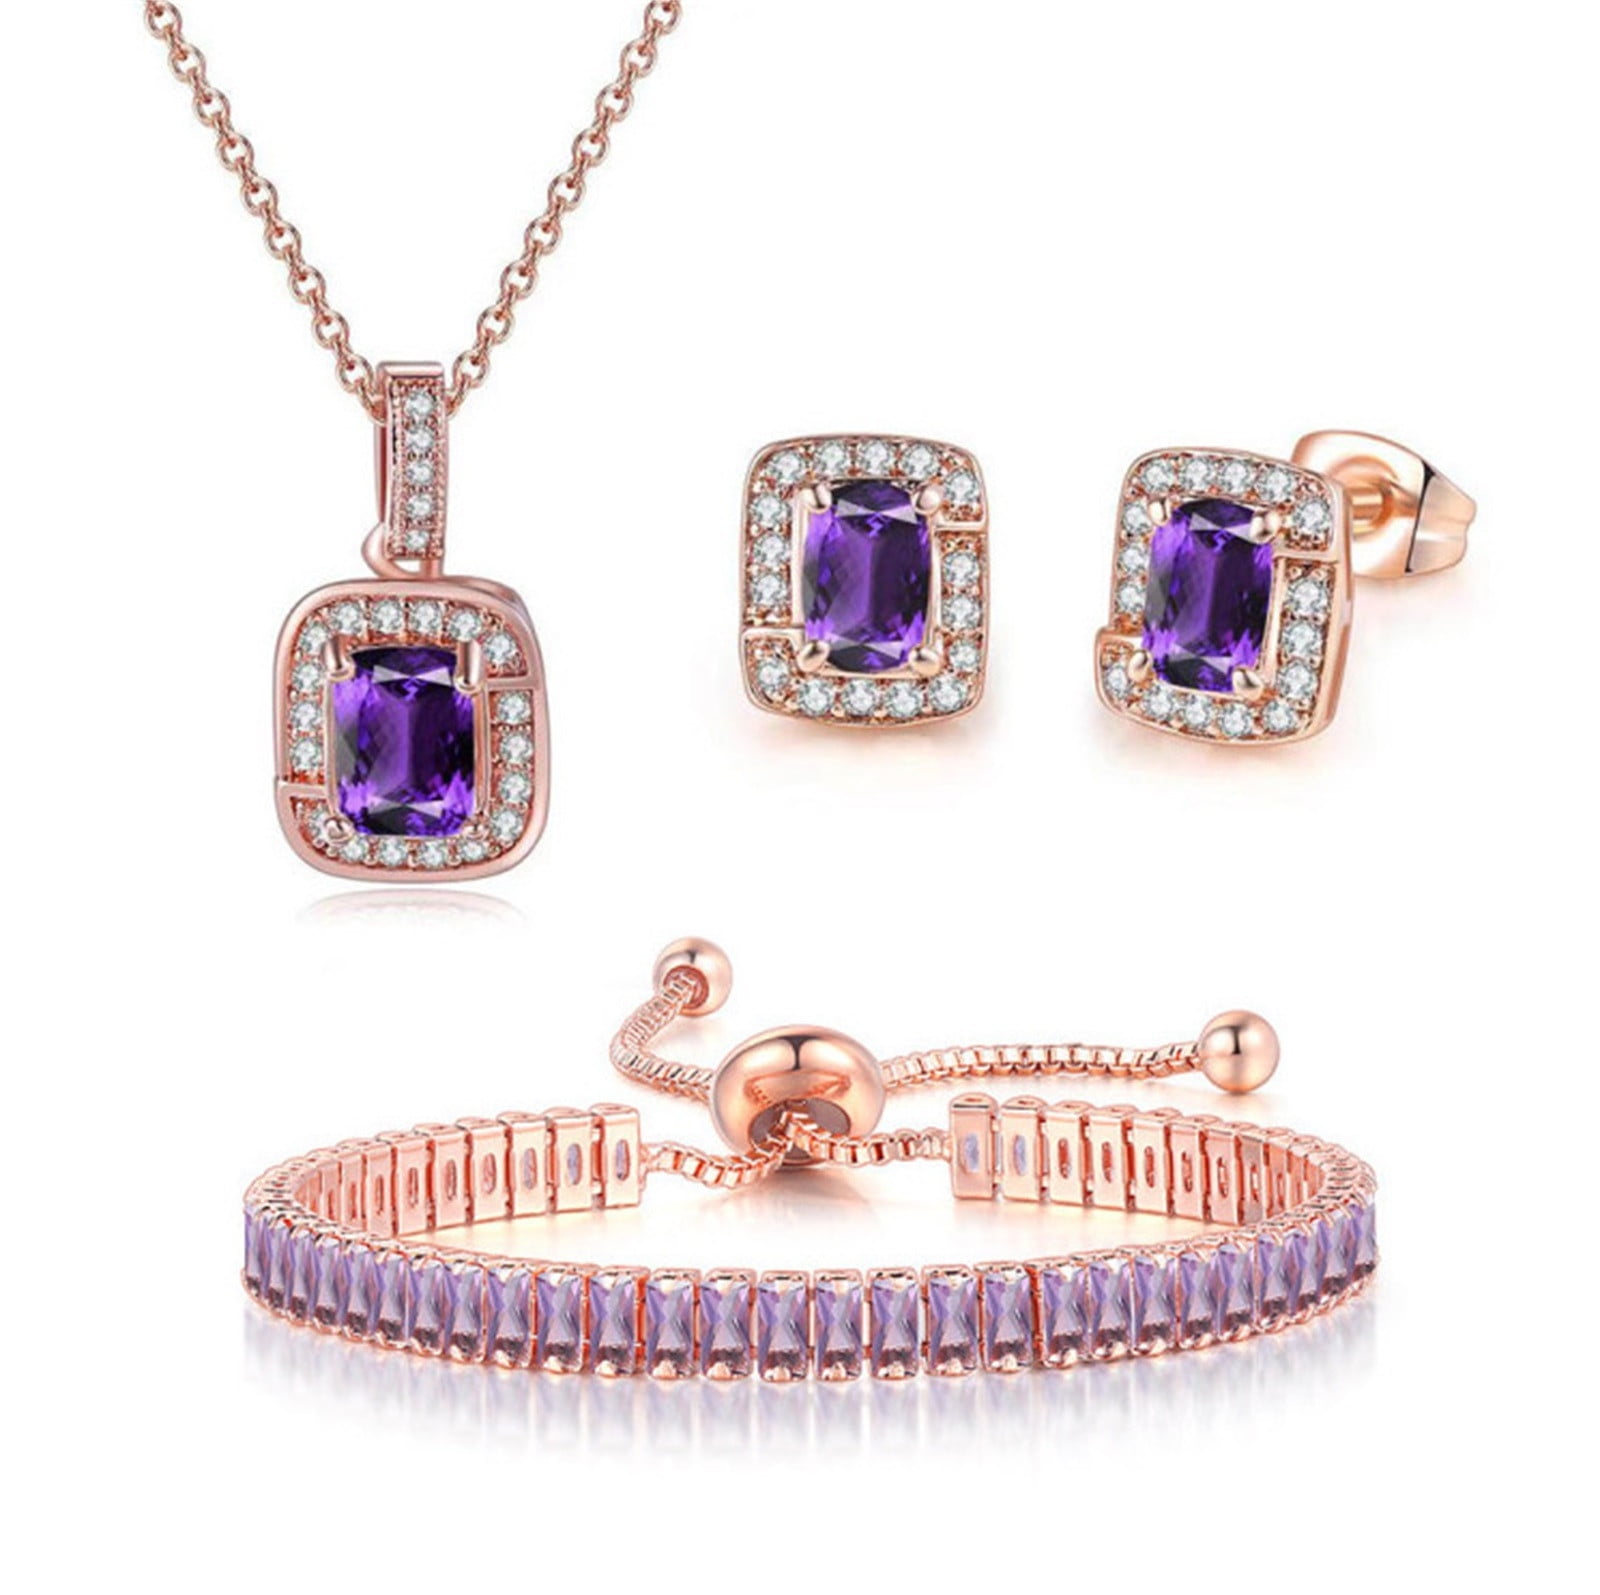 2pcs/set Teen Girl's Jewelry Set Including Gemstone Earrings And Necklace  For Age 12-16 Years Old